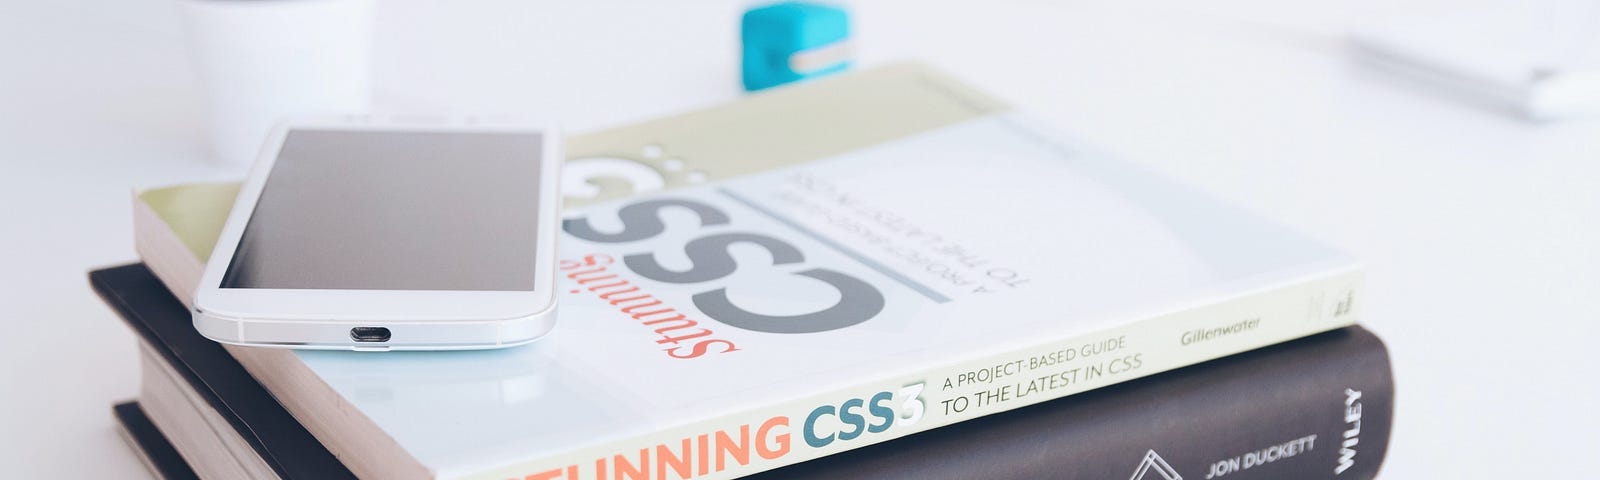 Stack of books titled “Stunning CSS” and “Javascript & JQuery”